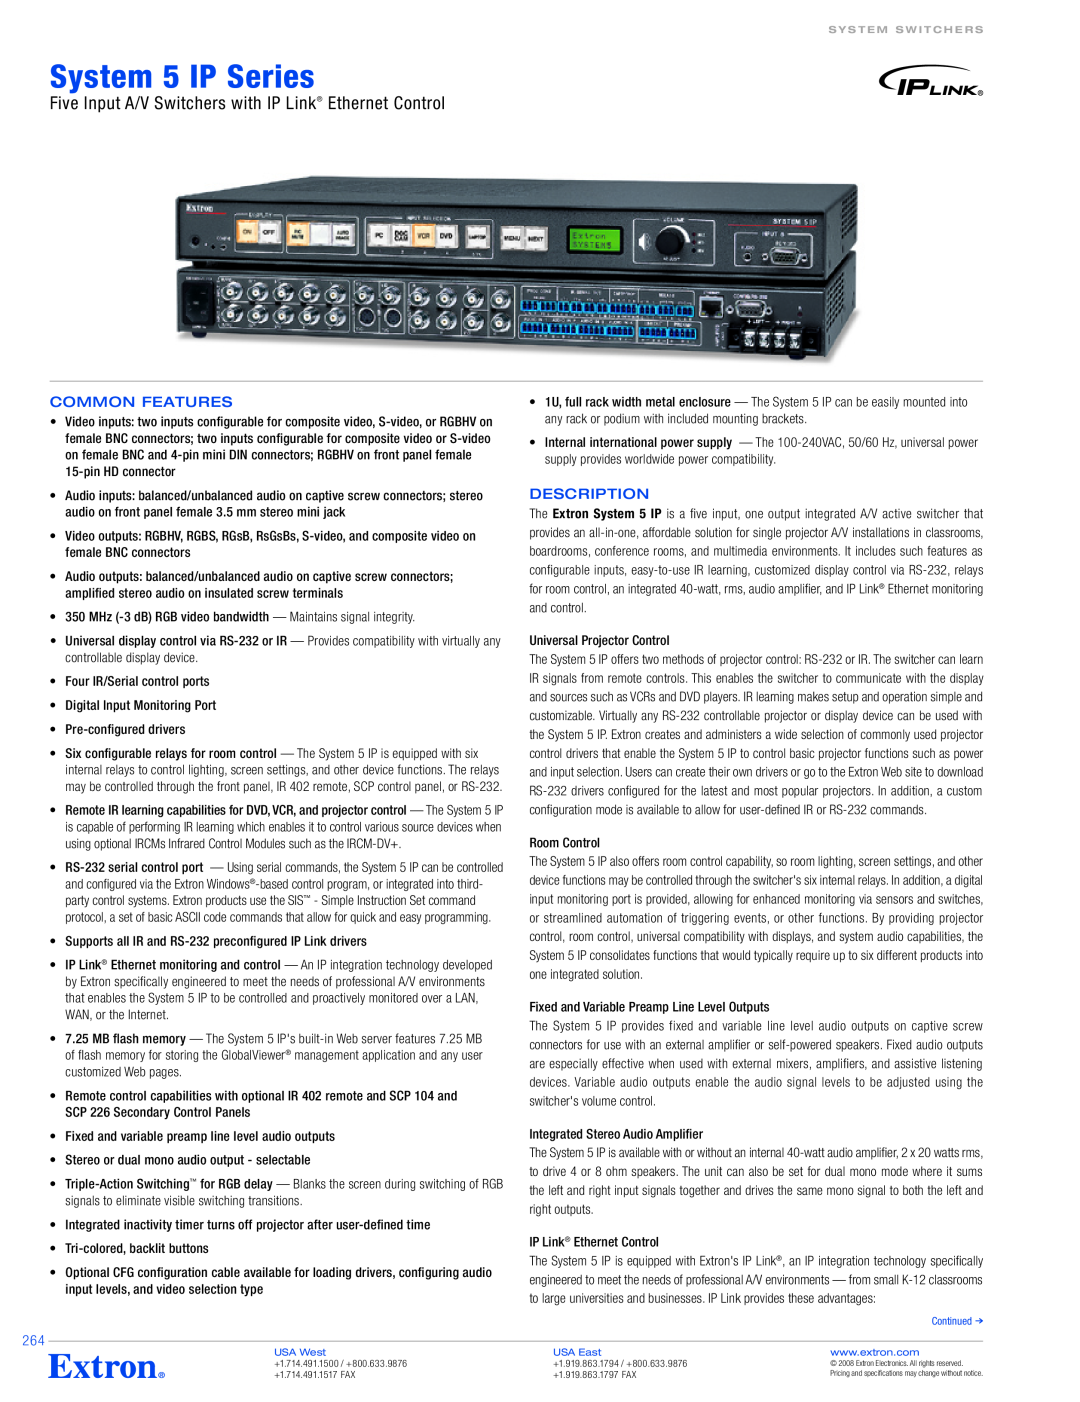 Extron electronic System 5 IP Series specifications Five Input A/V Switchers with IP Link Ethernet Control, Description 